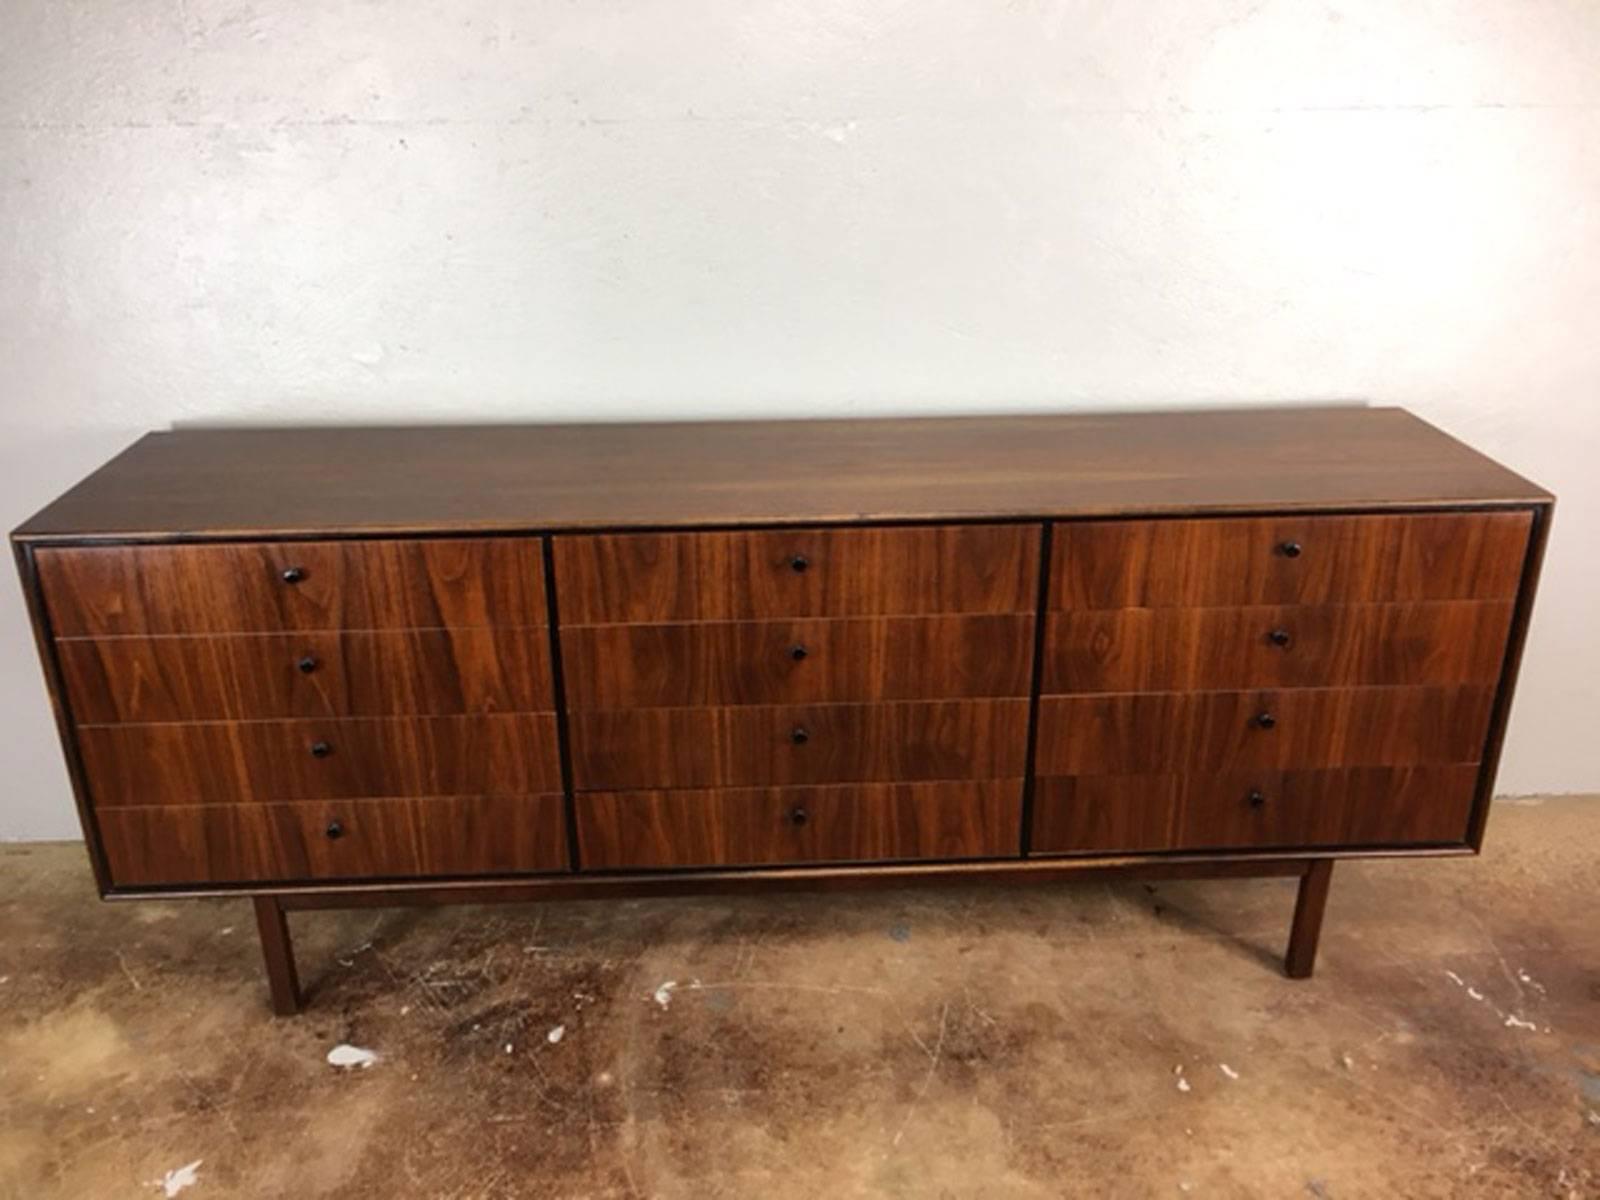 Rare 12-drawer dresser by Florence Knoll in Walnut. Original condition. Not refinished. Metal pulls. Extraordinarily nice.